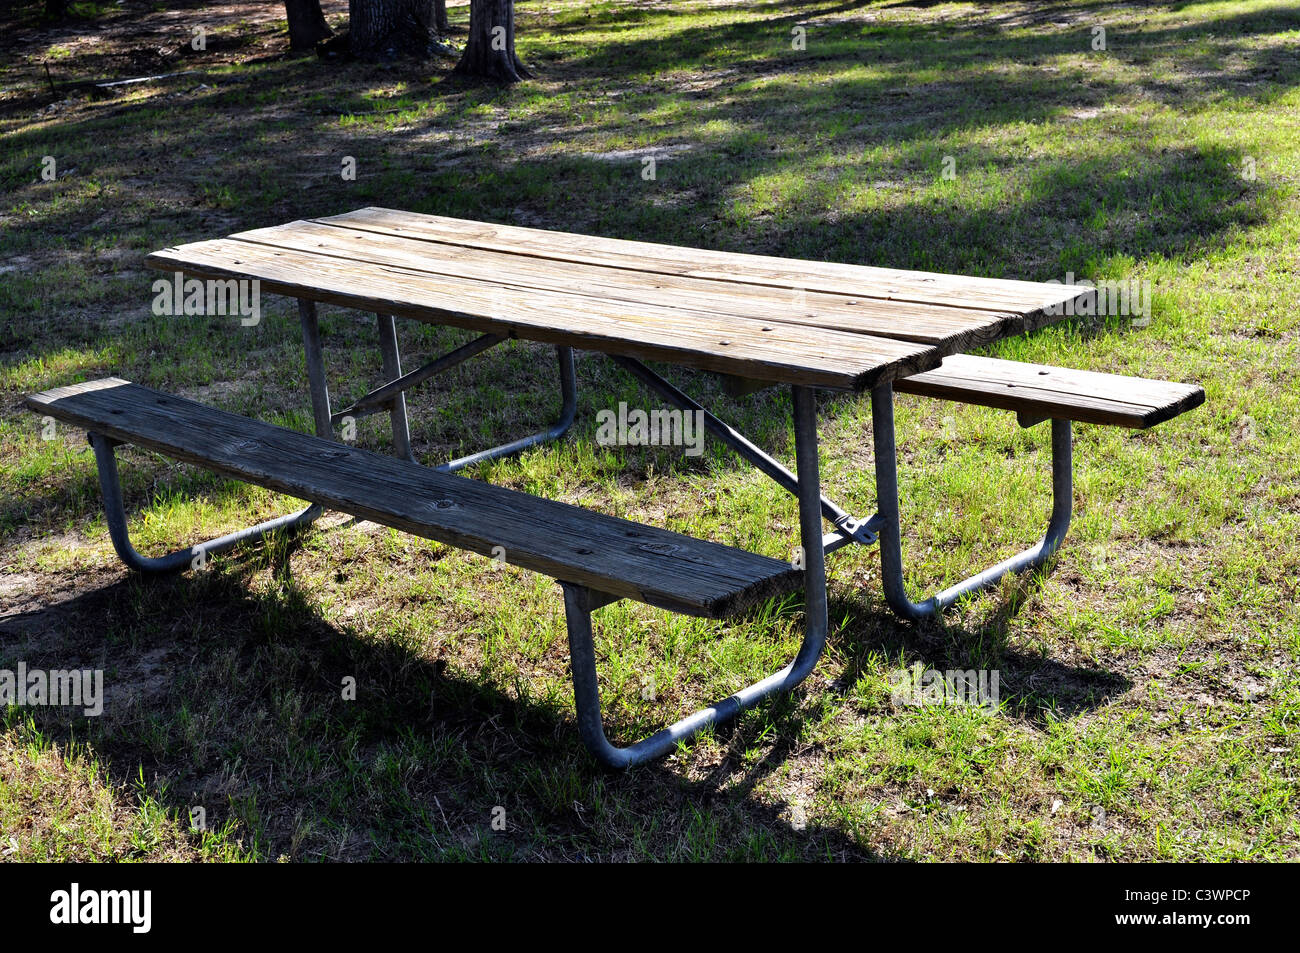 A old picnic table setting unused in the outdoors. Stock Photo